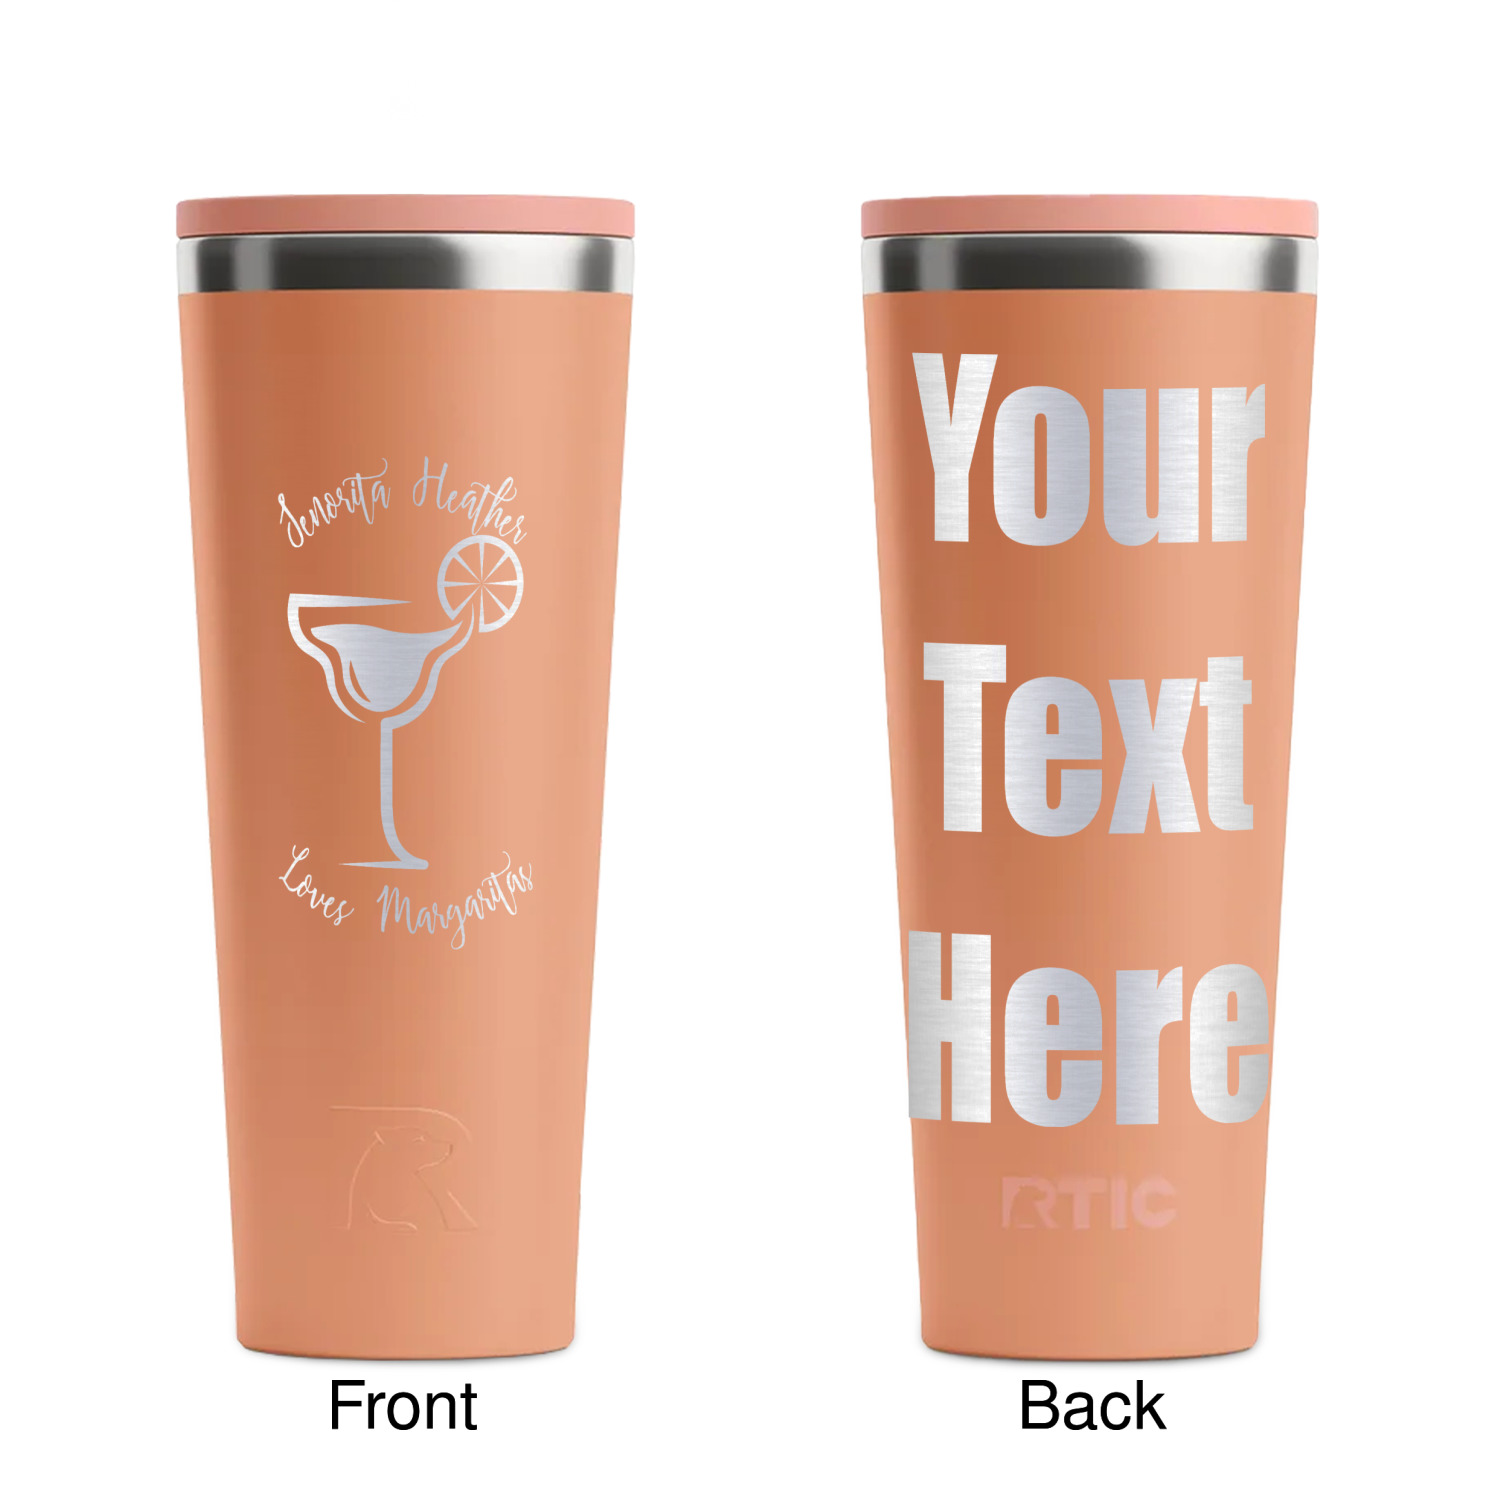 https://www.youcustomizeit.com/common/MAKE/1622723/Margarita-Lover-Peach-RTIC-Everyday-Tumbler-28-oz-Front-and-Back.jpg?lm=1698262167